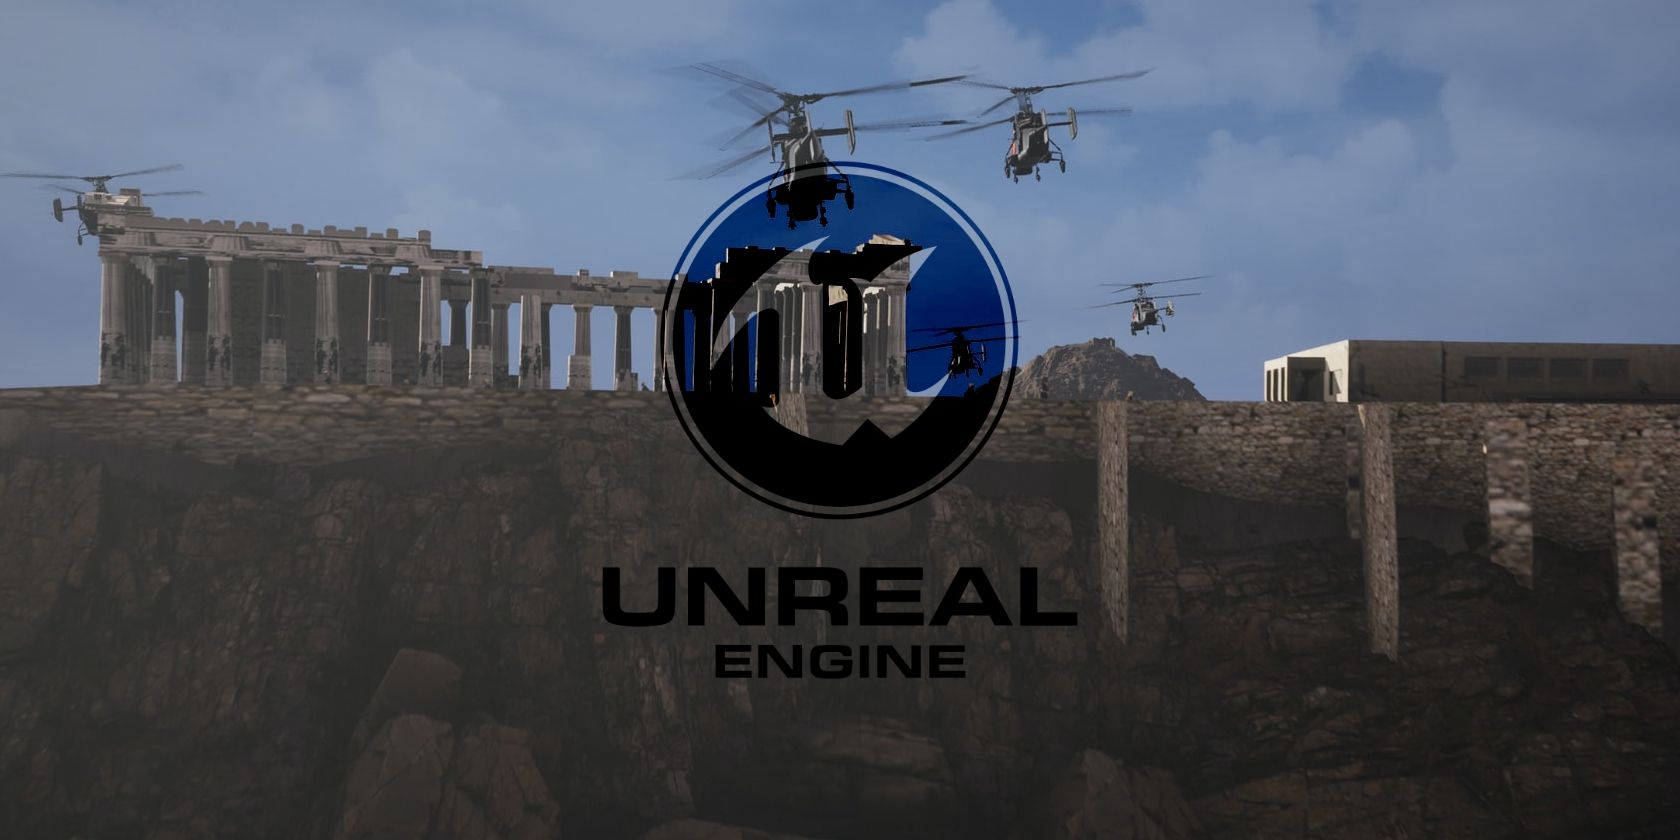 The Unreal Engine logo superimposed onto an example scene featuring helicopters